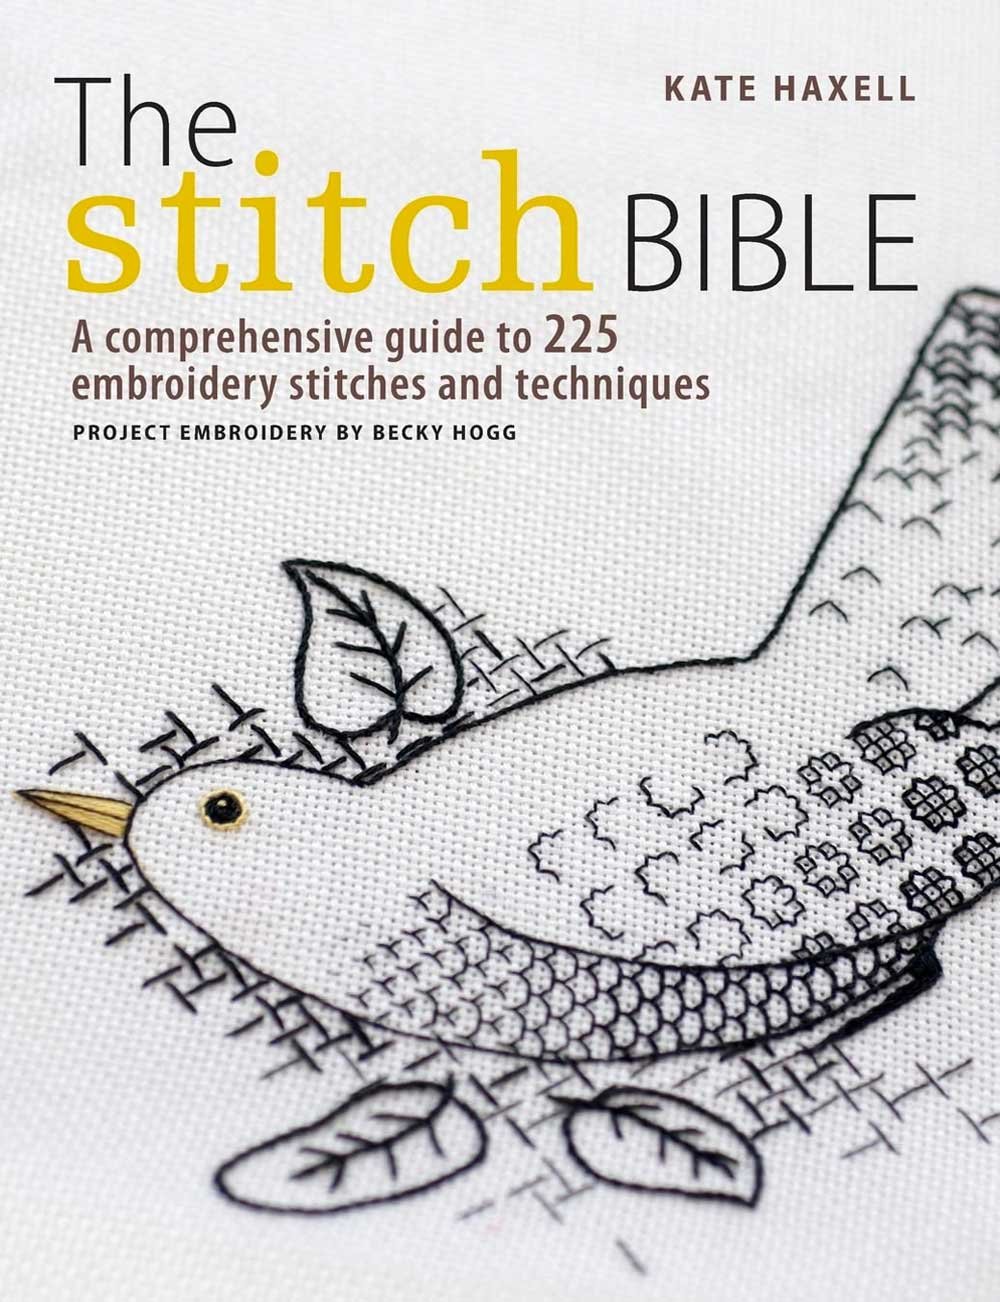 An indispensable guide to the most popular hand stitches and essential stitching techniques.